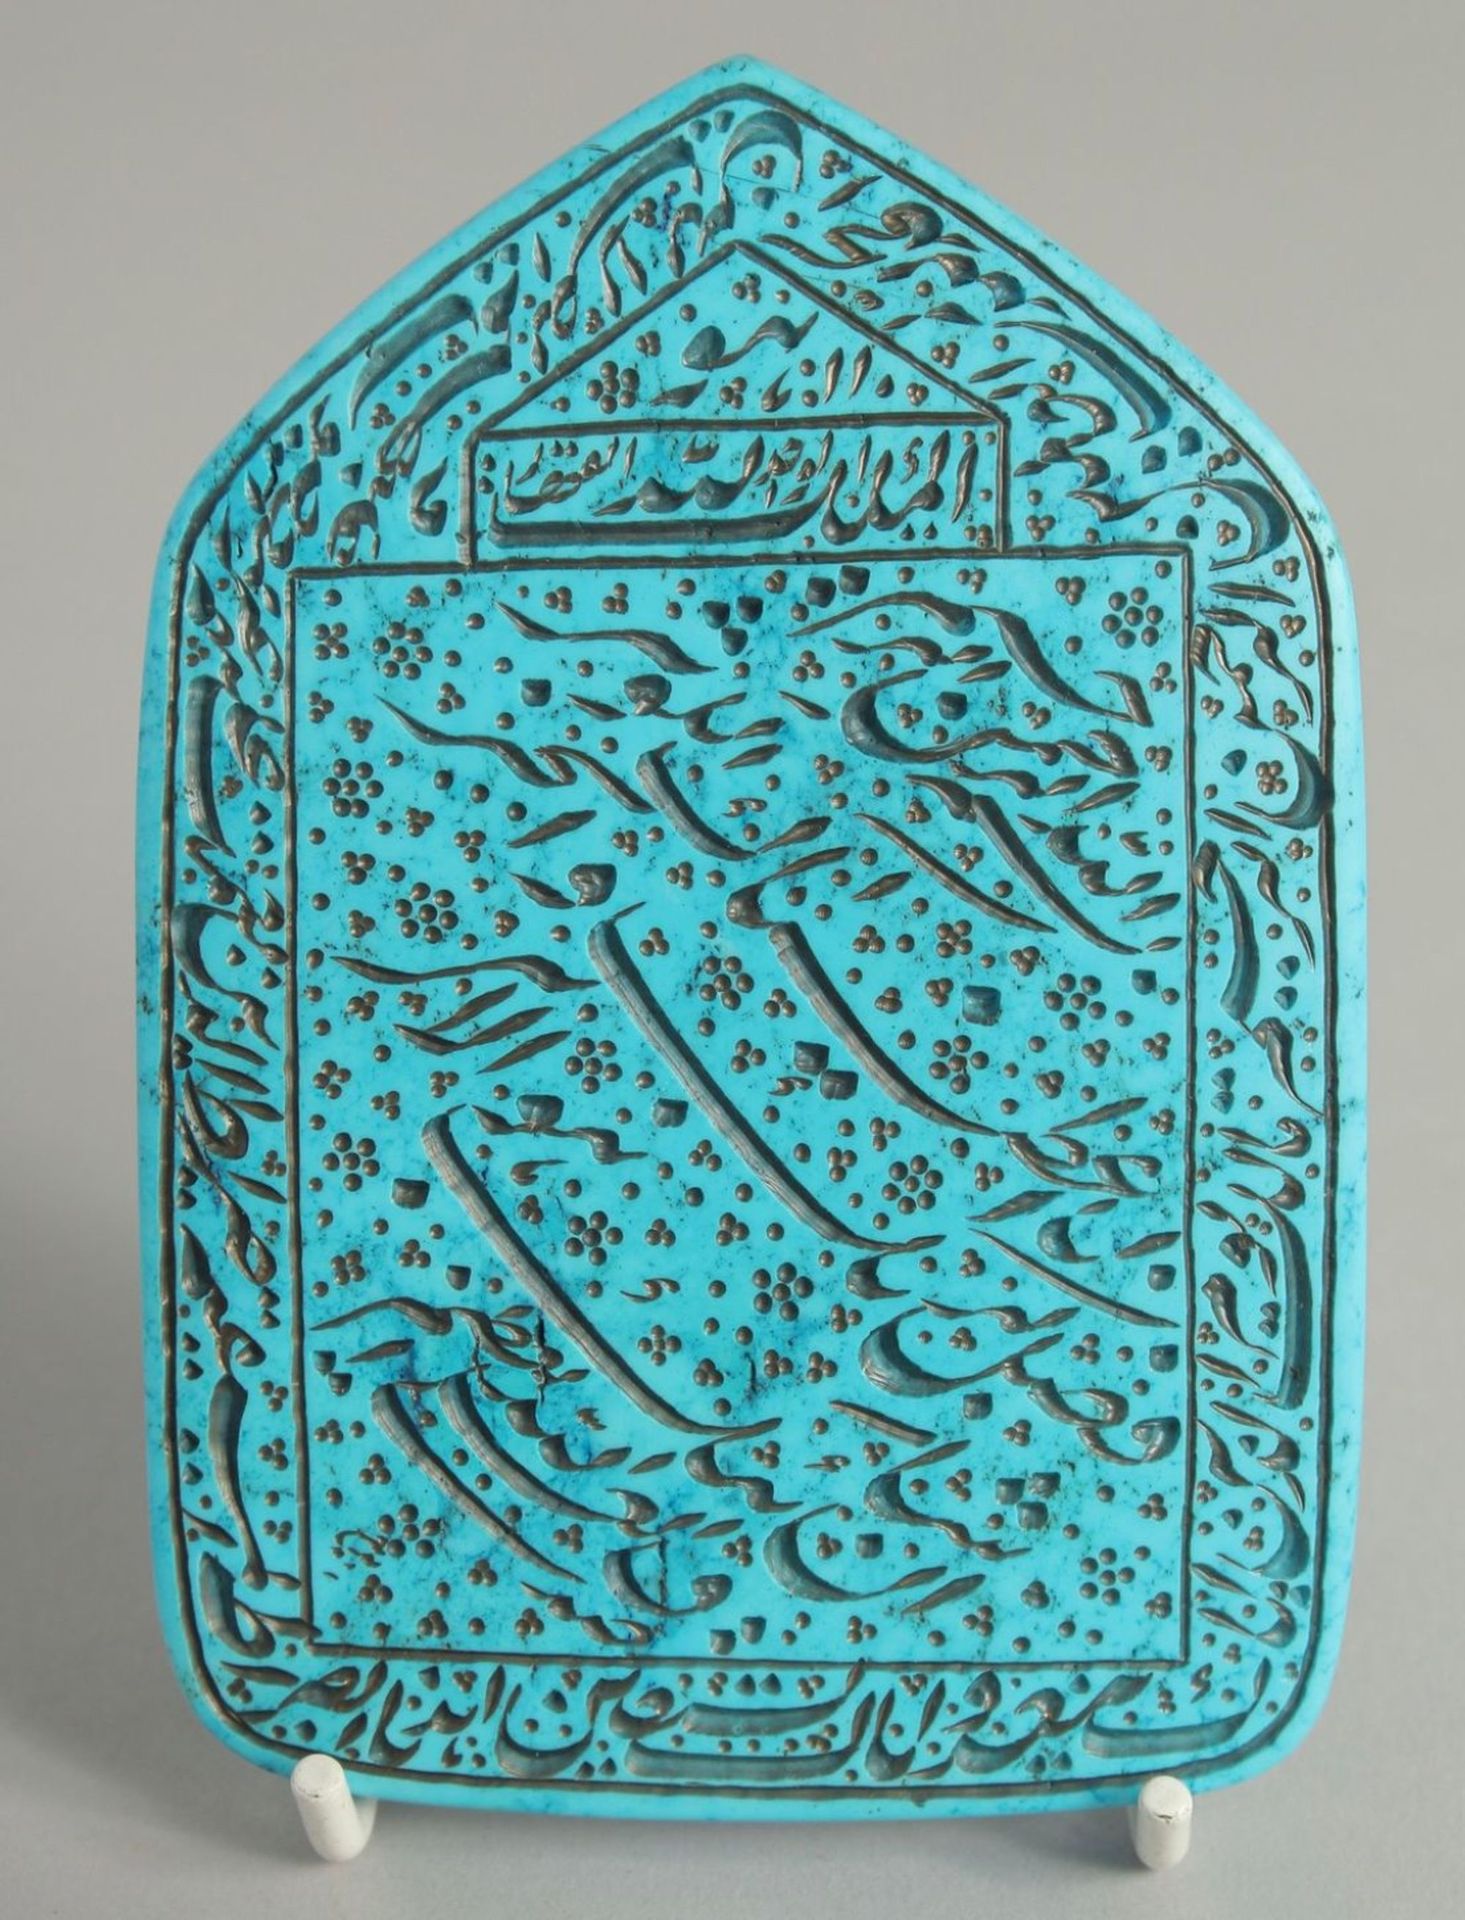 A PERSIAN TURQUOISE STONE CARVED SEAL, QAJAR EARLY 20TH CENTURY Ein türkisfarben&hellip;